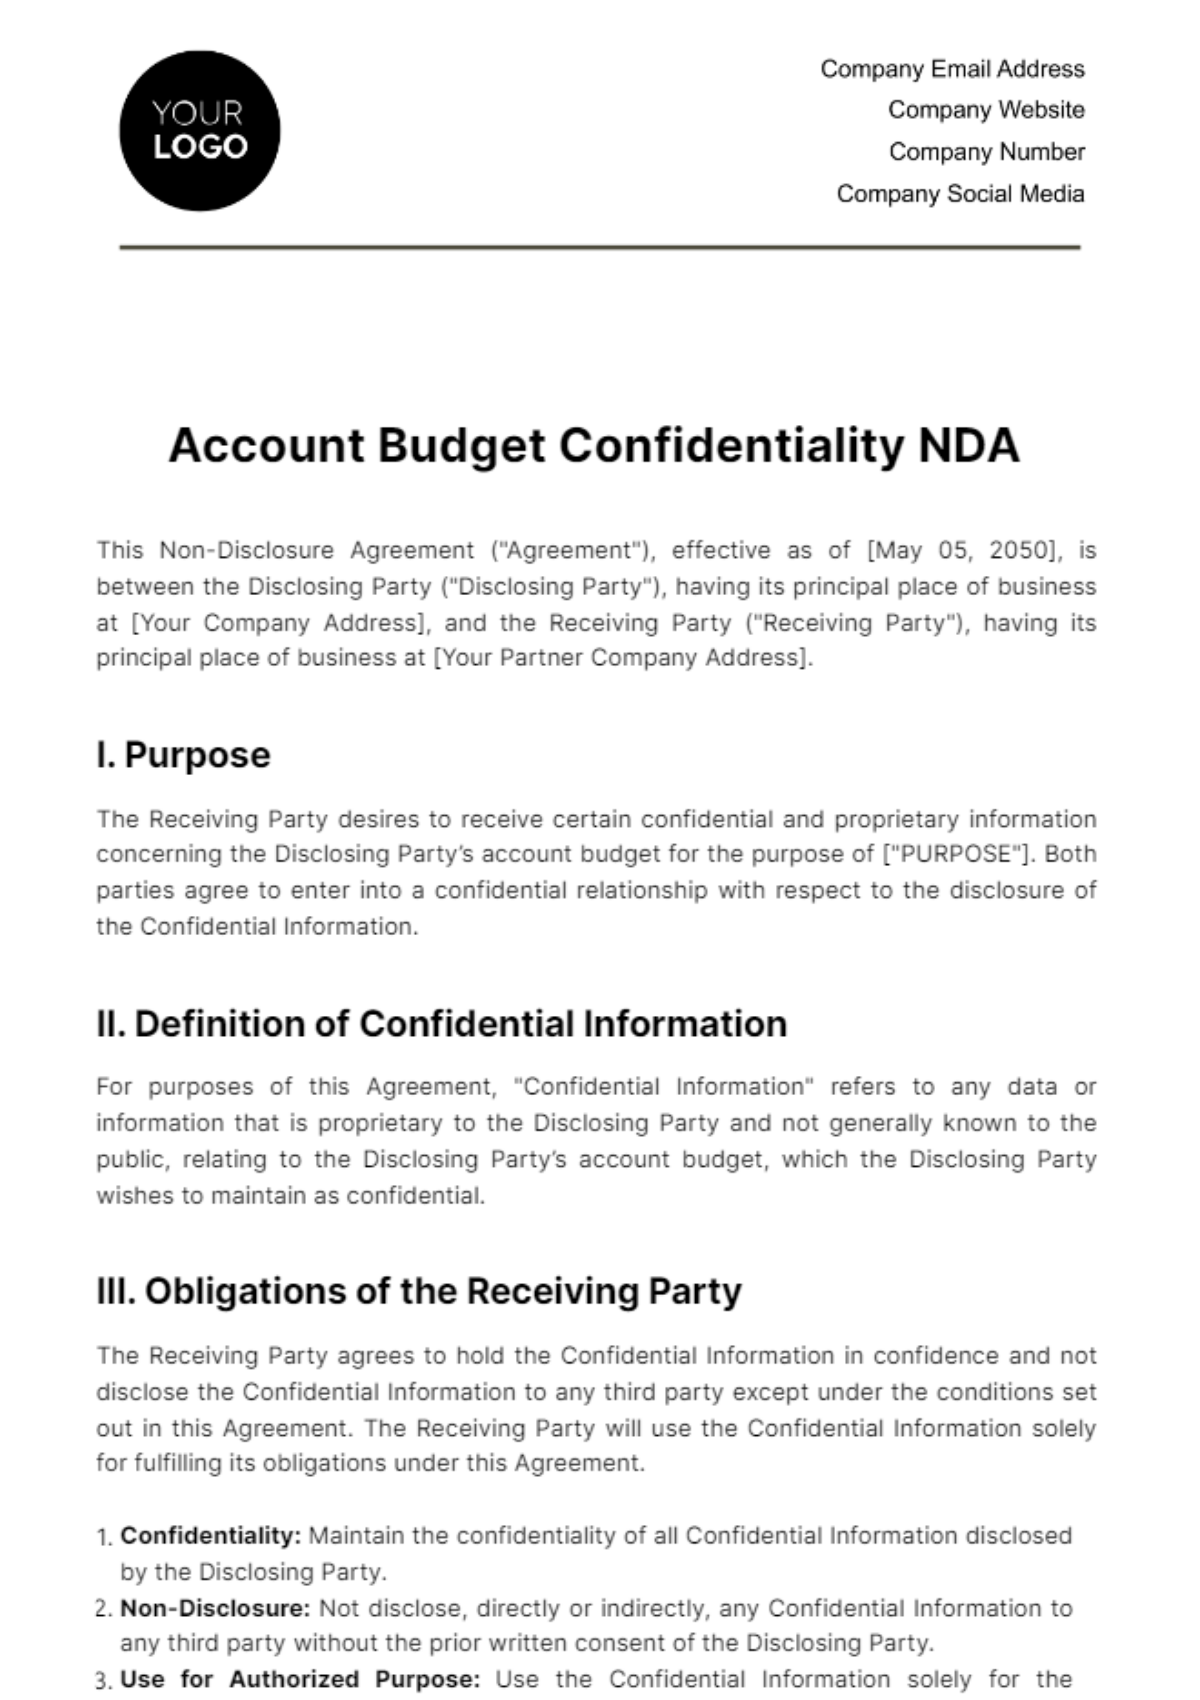 Free Account Budget Confidentiality NDA Template